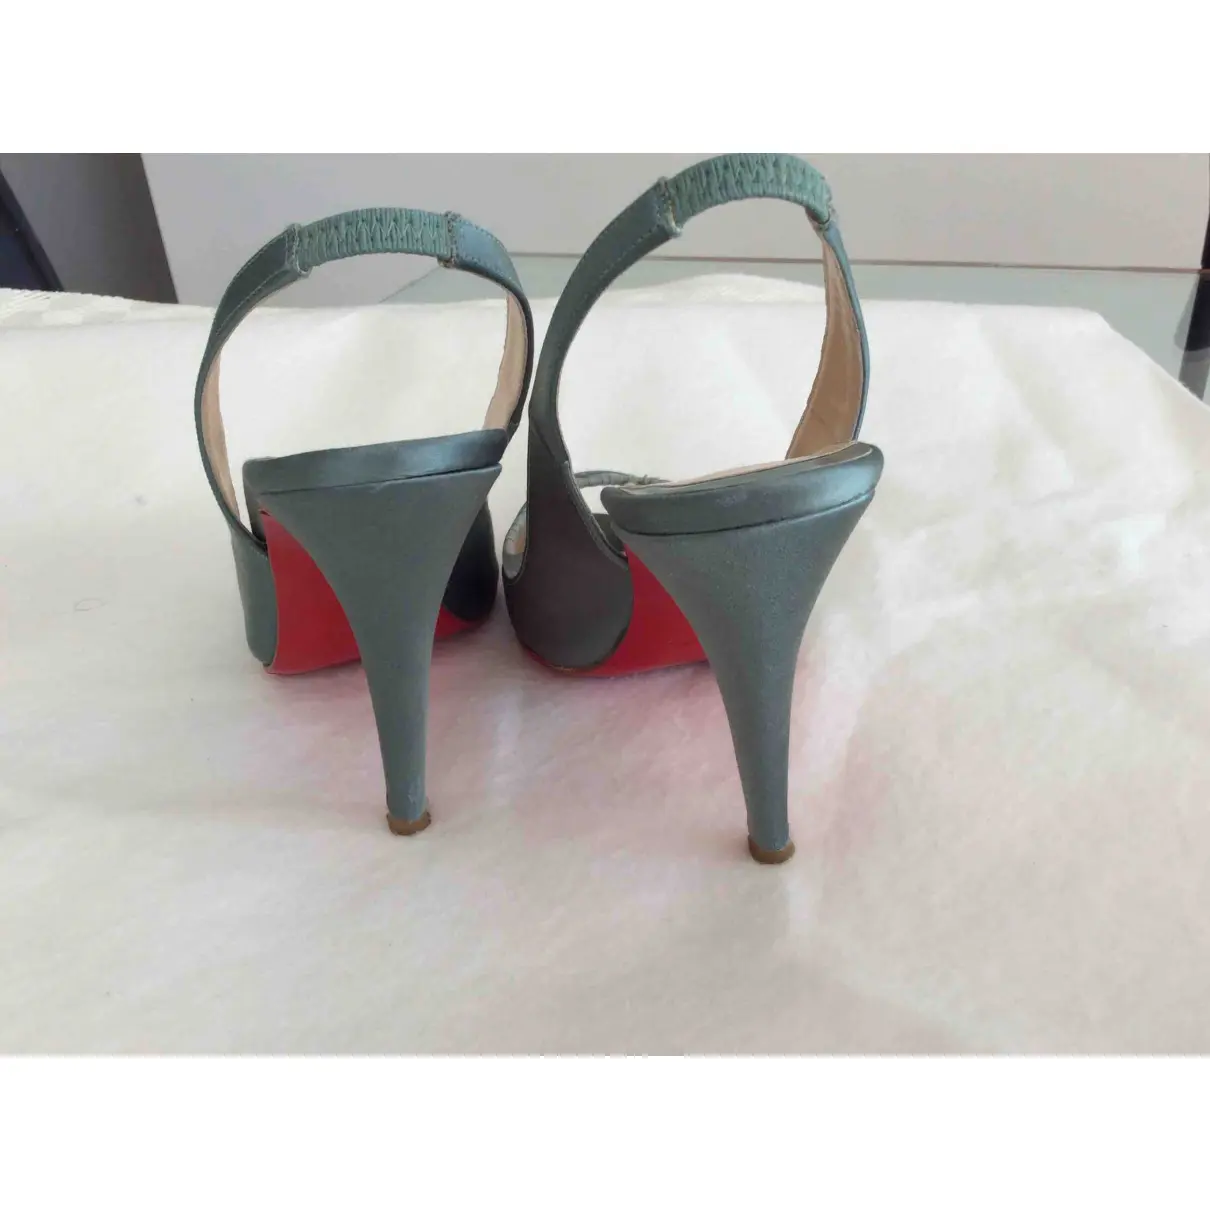 Buy Christian Louboutin Cloth sandals online